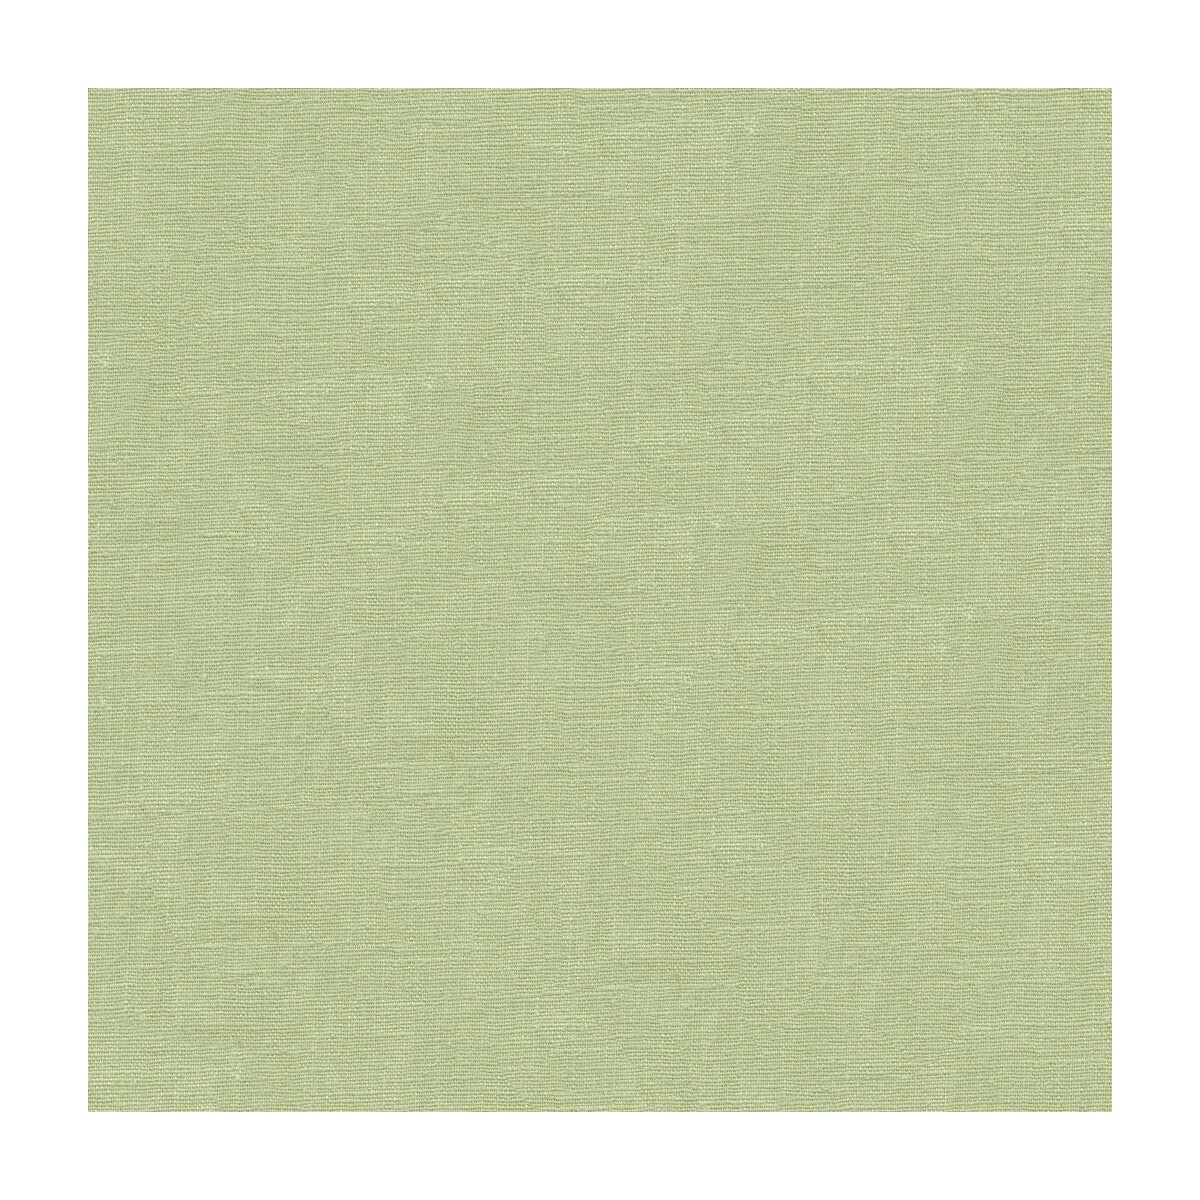 Dublin fabric in jade color - pattern 32344.130.0 - by Kravet Basics in the Perfect Plains collection